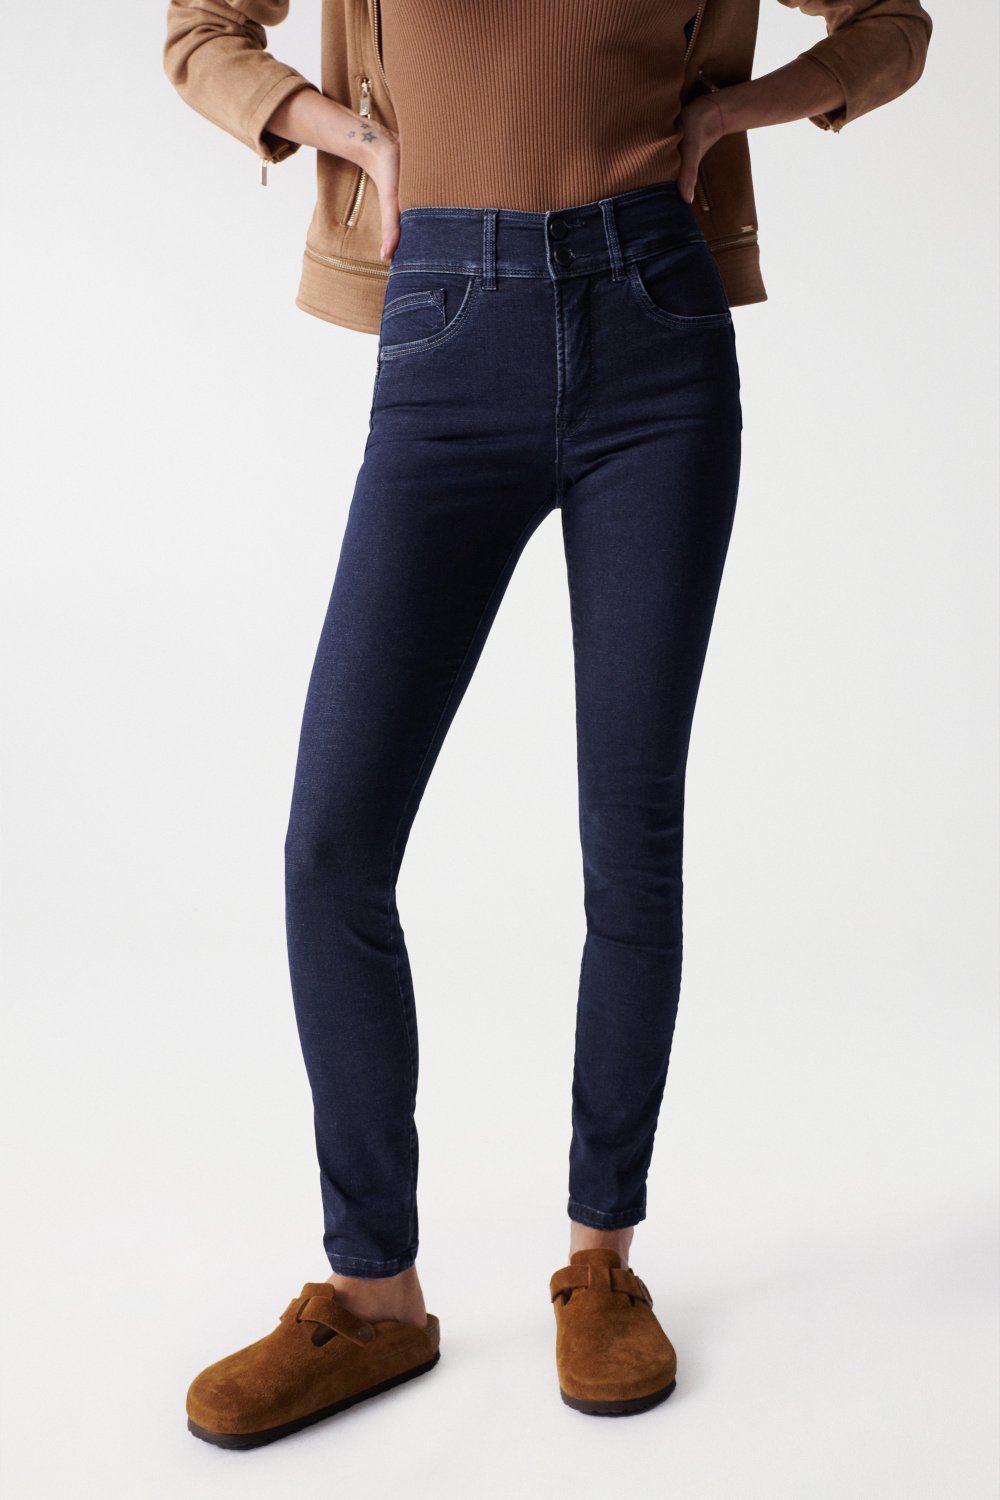 PUSH IN SECRET SKINNY SOFT TOUCH JEANS - Salsa